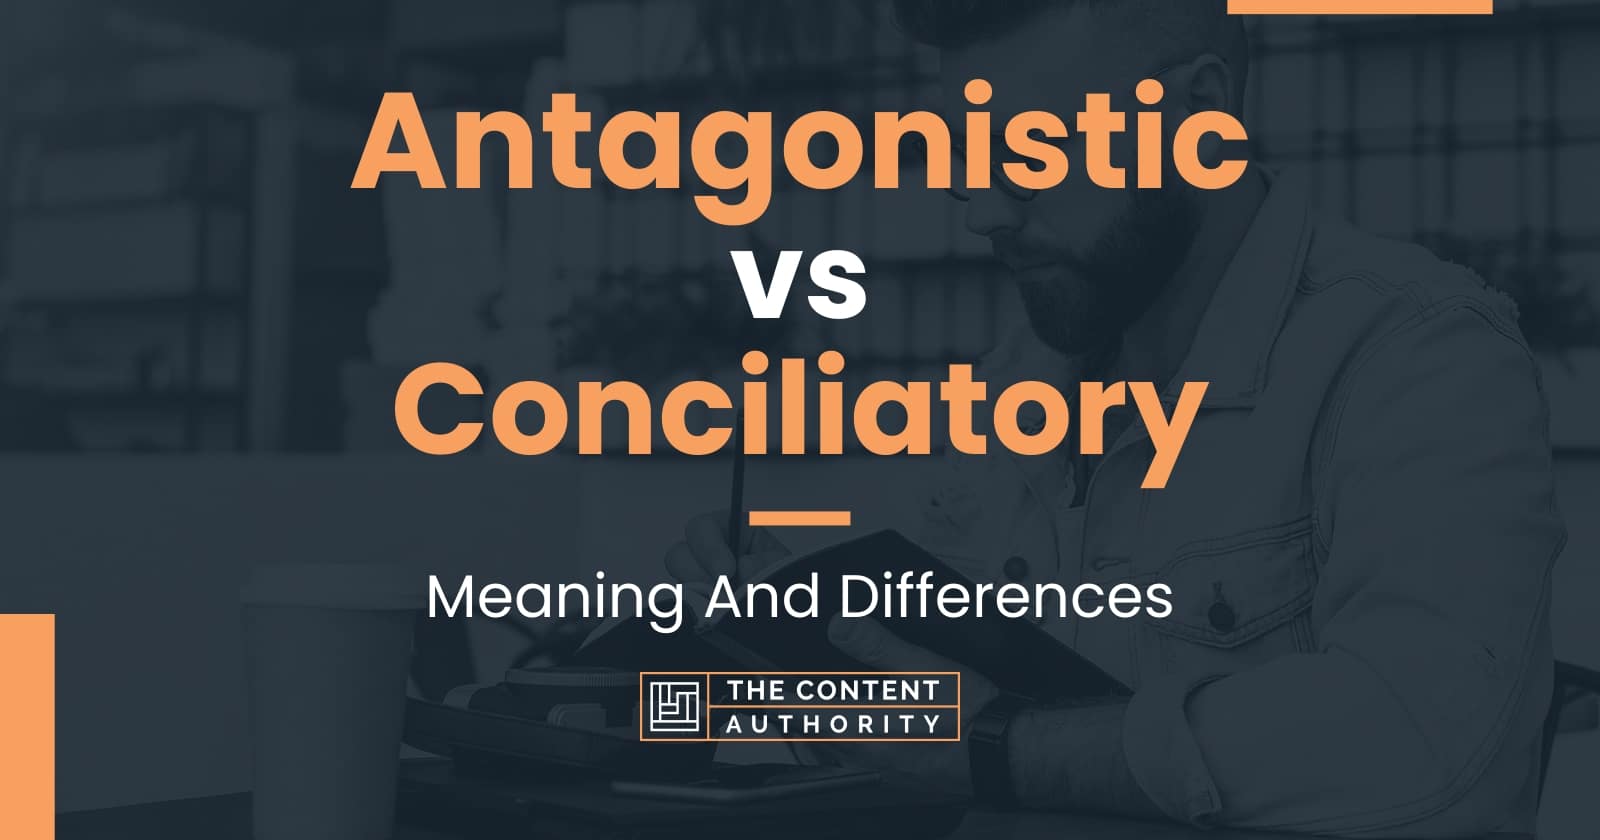 Antagonistic vs Conciliatory: Meaning And Differences